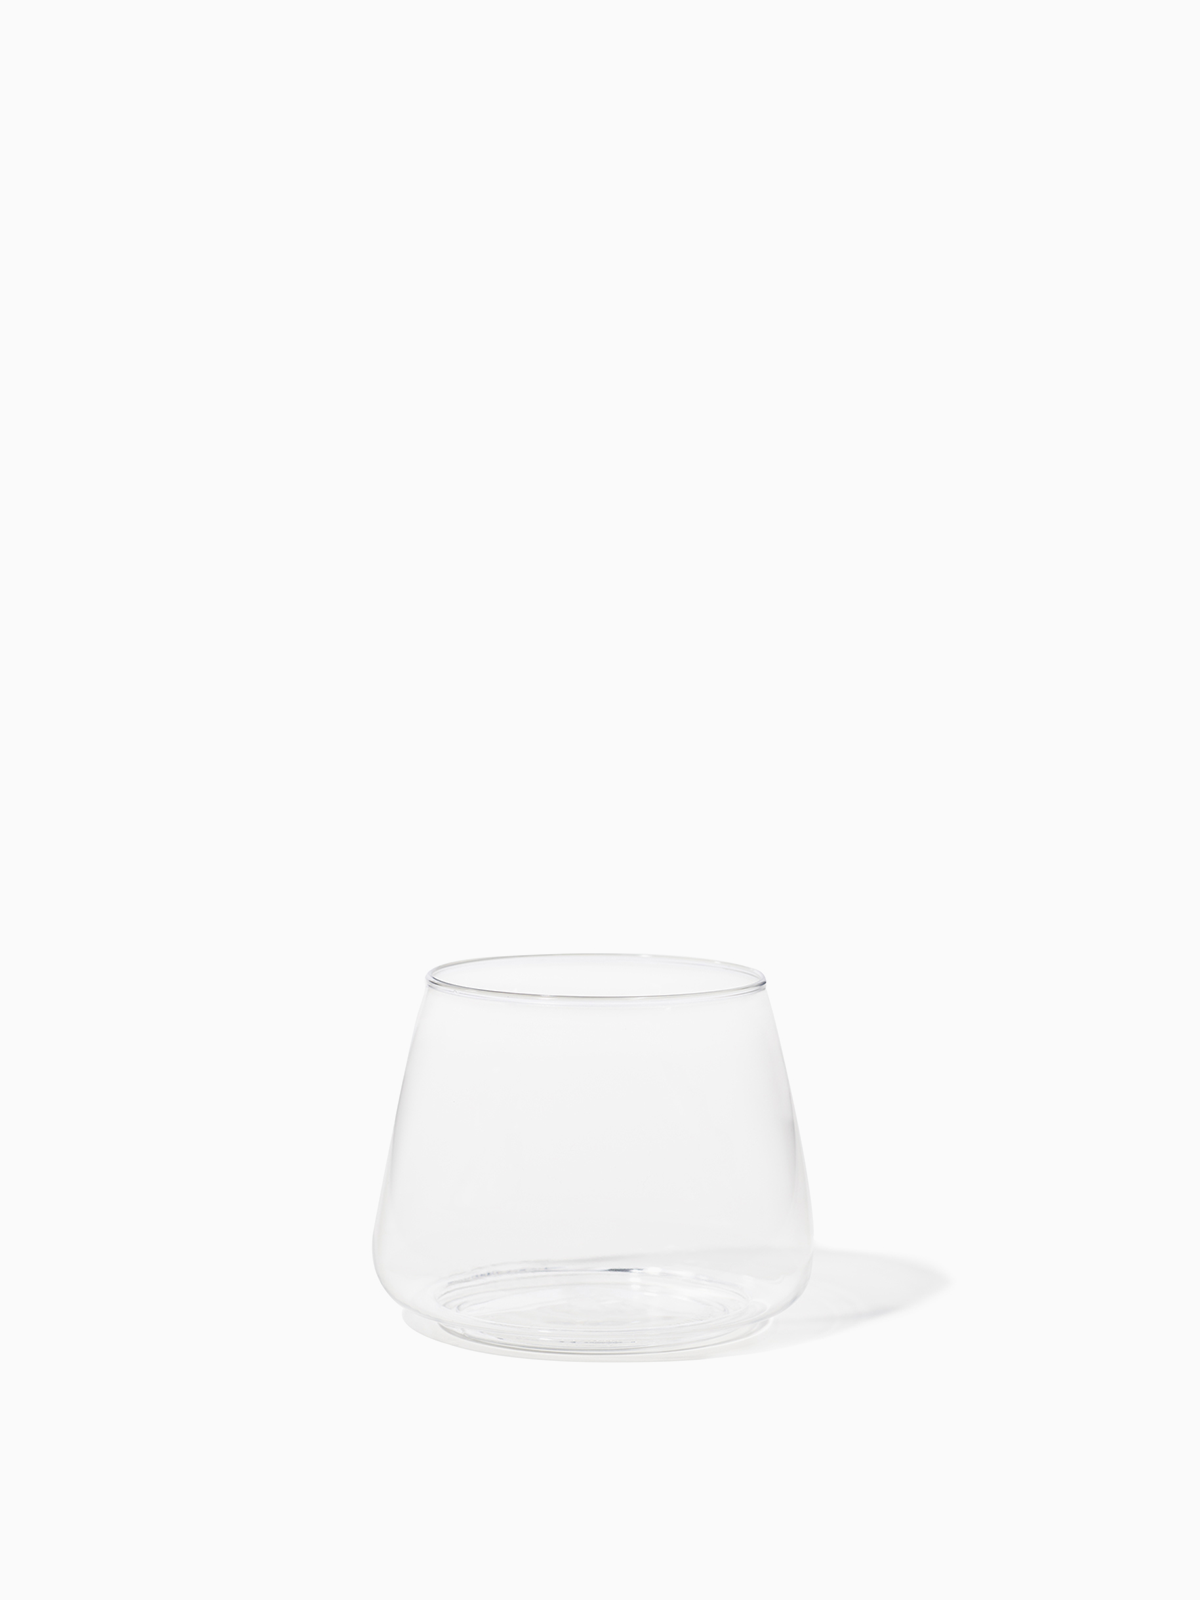 Food Tool Friday: These Spill-Proof Drinking Glasses Will Rock